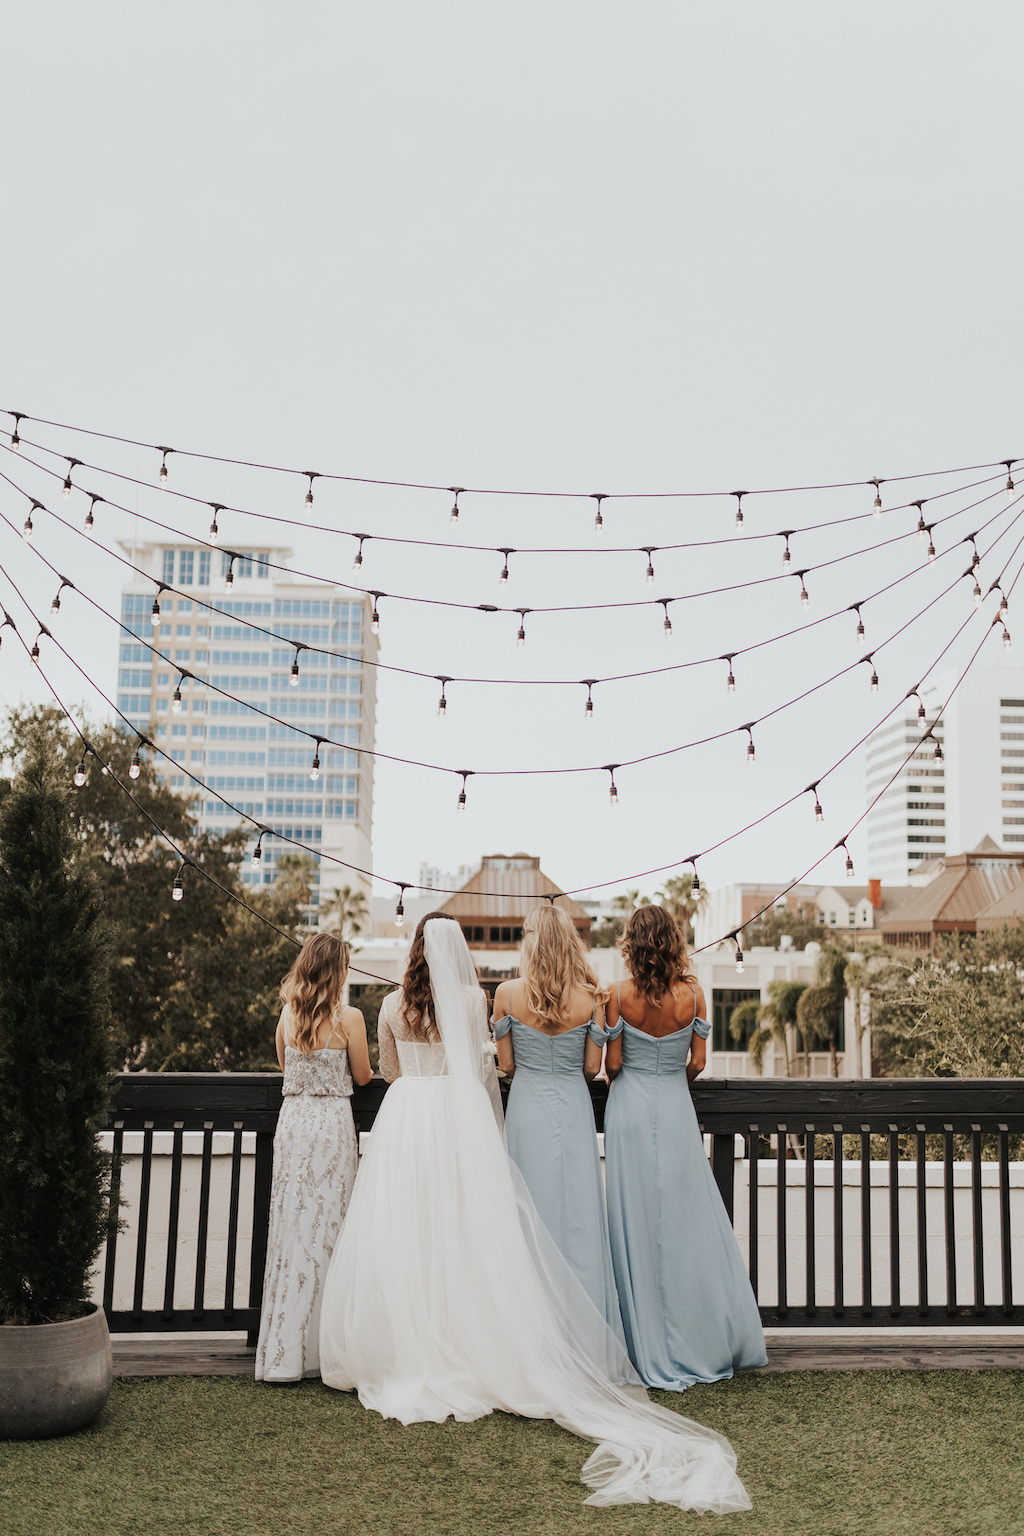 Bride in Vera Wang High Neck Lace and Tulle Corset Bodice Long Sleeve Wedding Dress, Bridesmaids in Dusty Blue Off the Shoulder Matching Dresses, Rooftop Wedding Portrait | St. Pete Rooftop Wedding Venue Station House